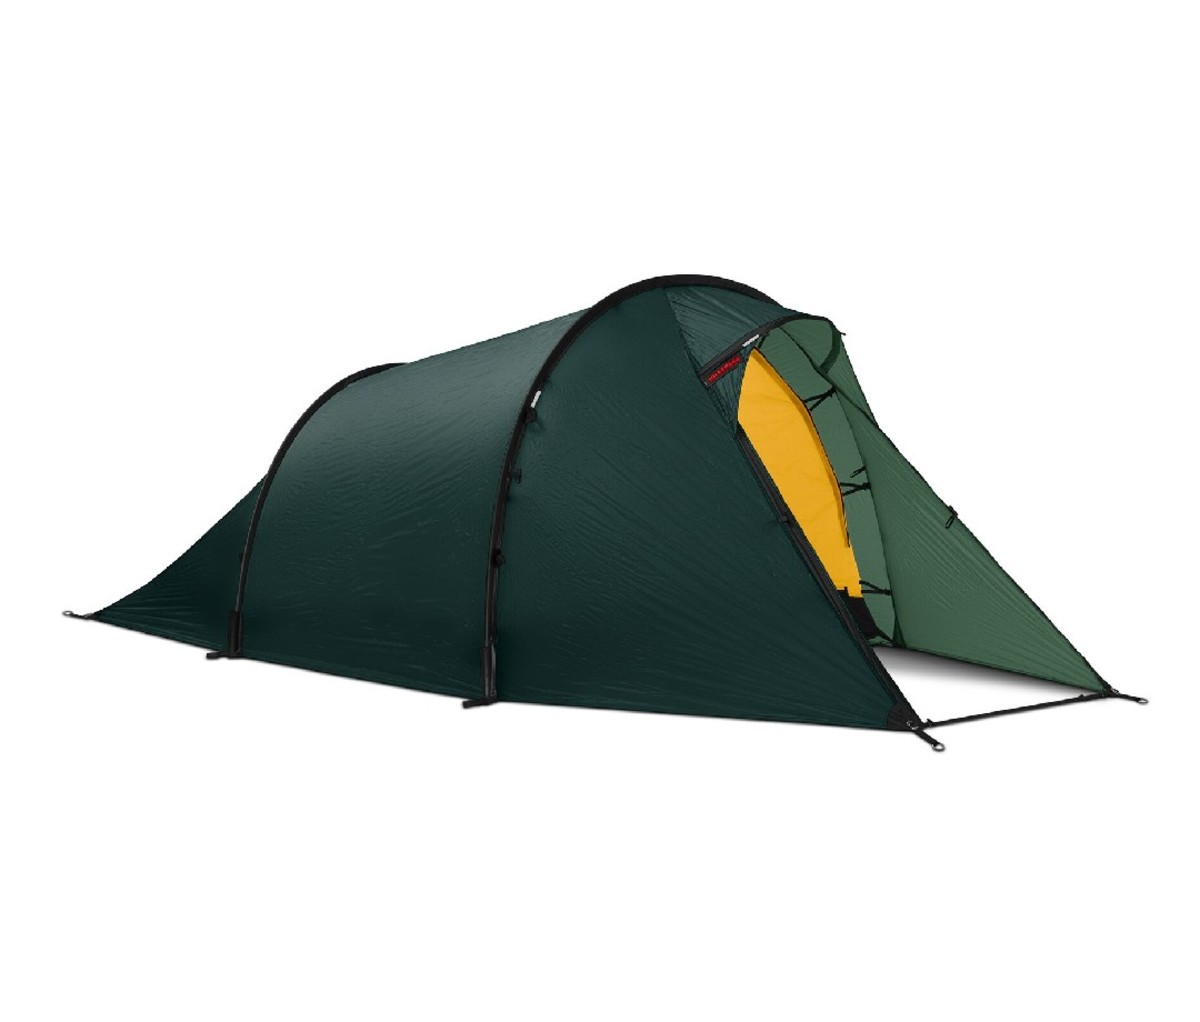 Green, two-person tent